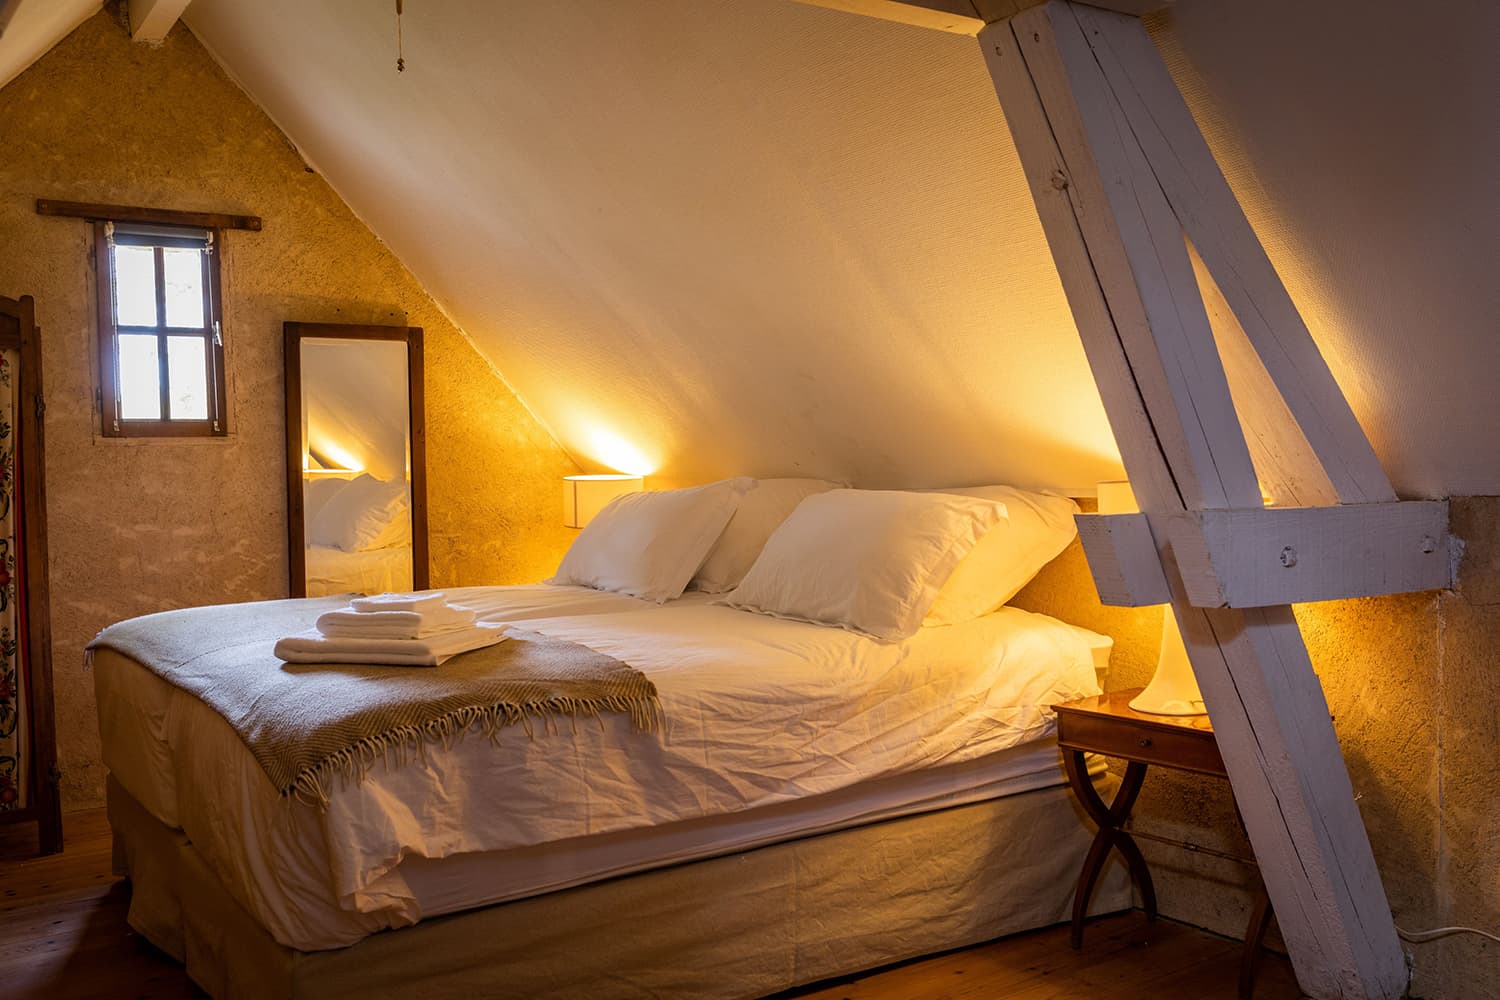 Bedroom | Holiday home in the Dordogne